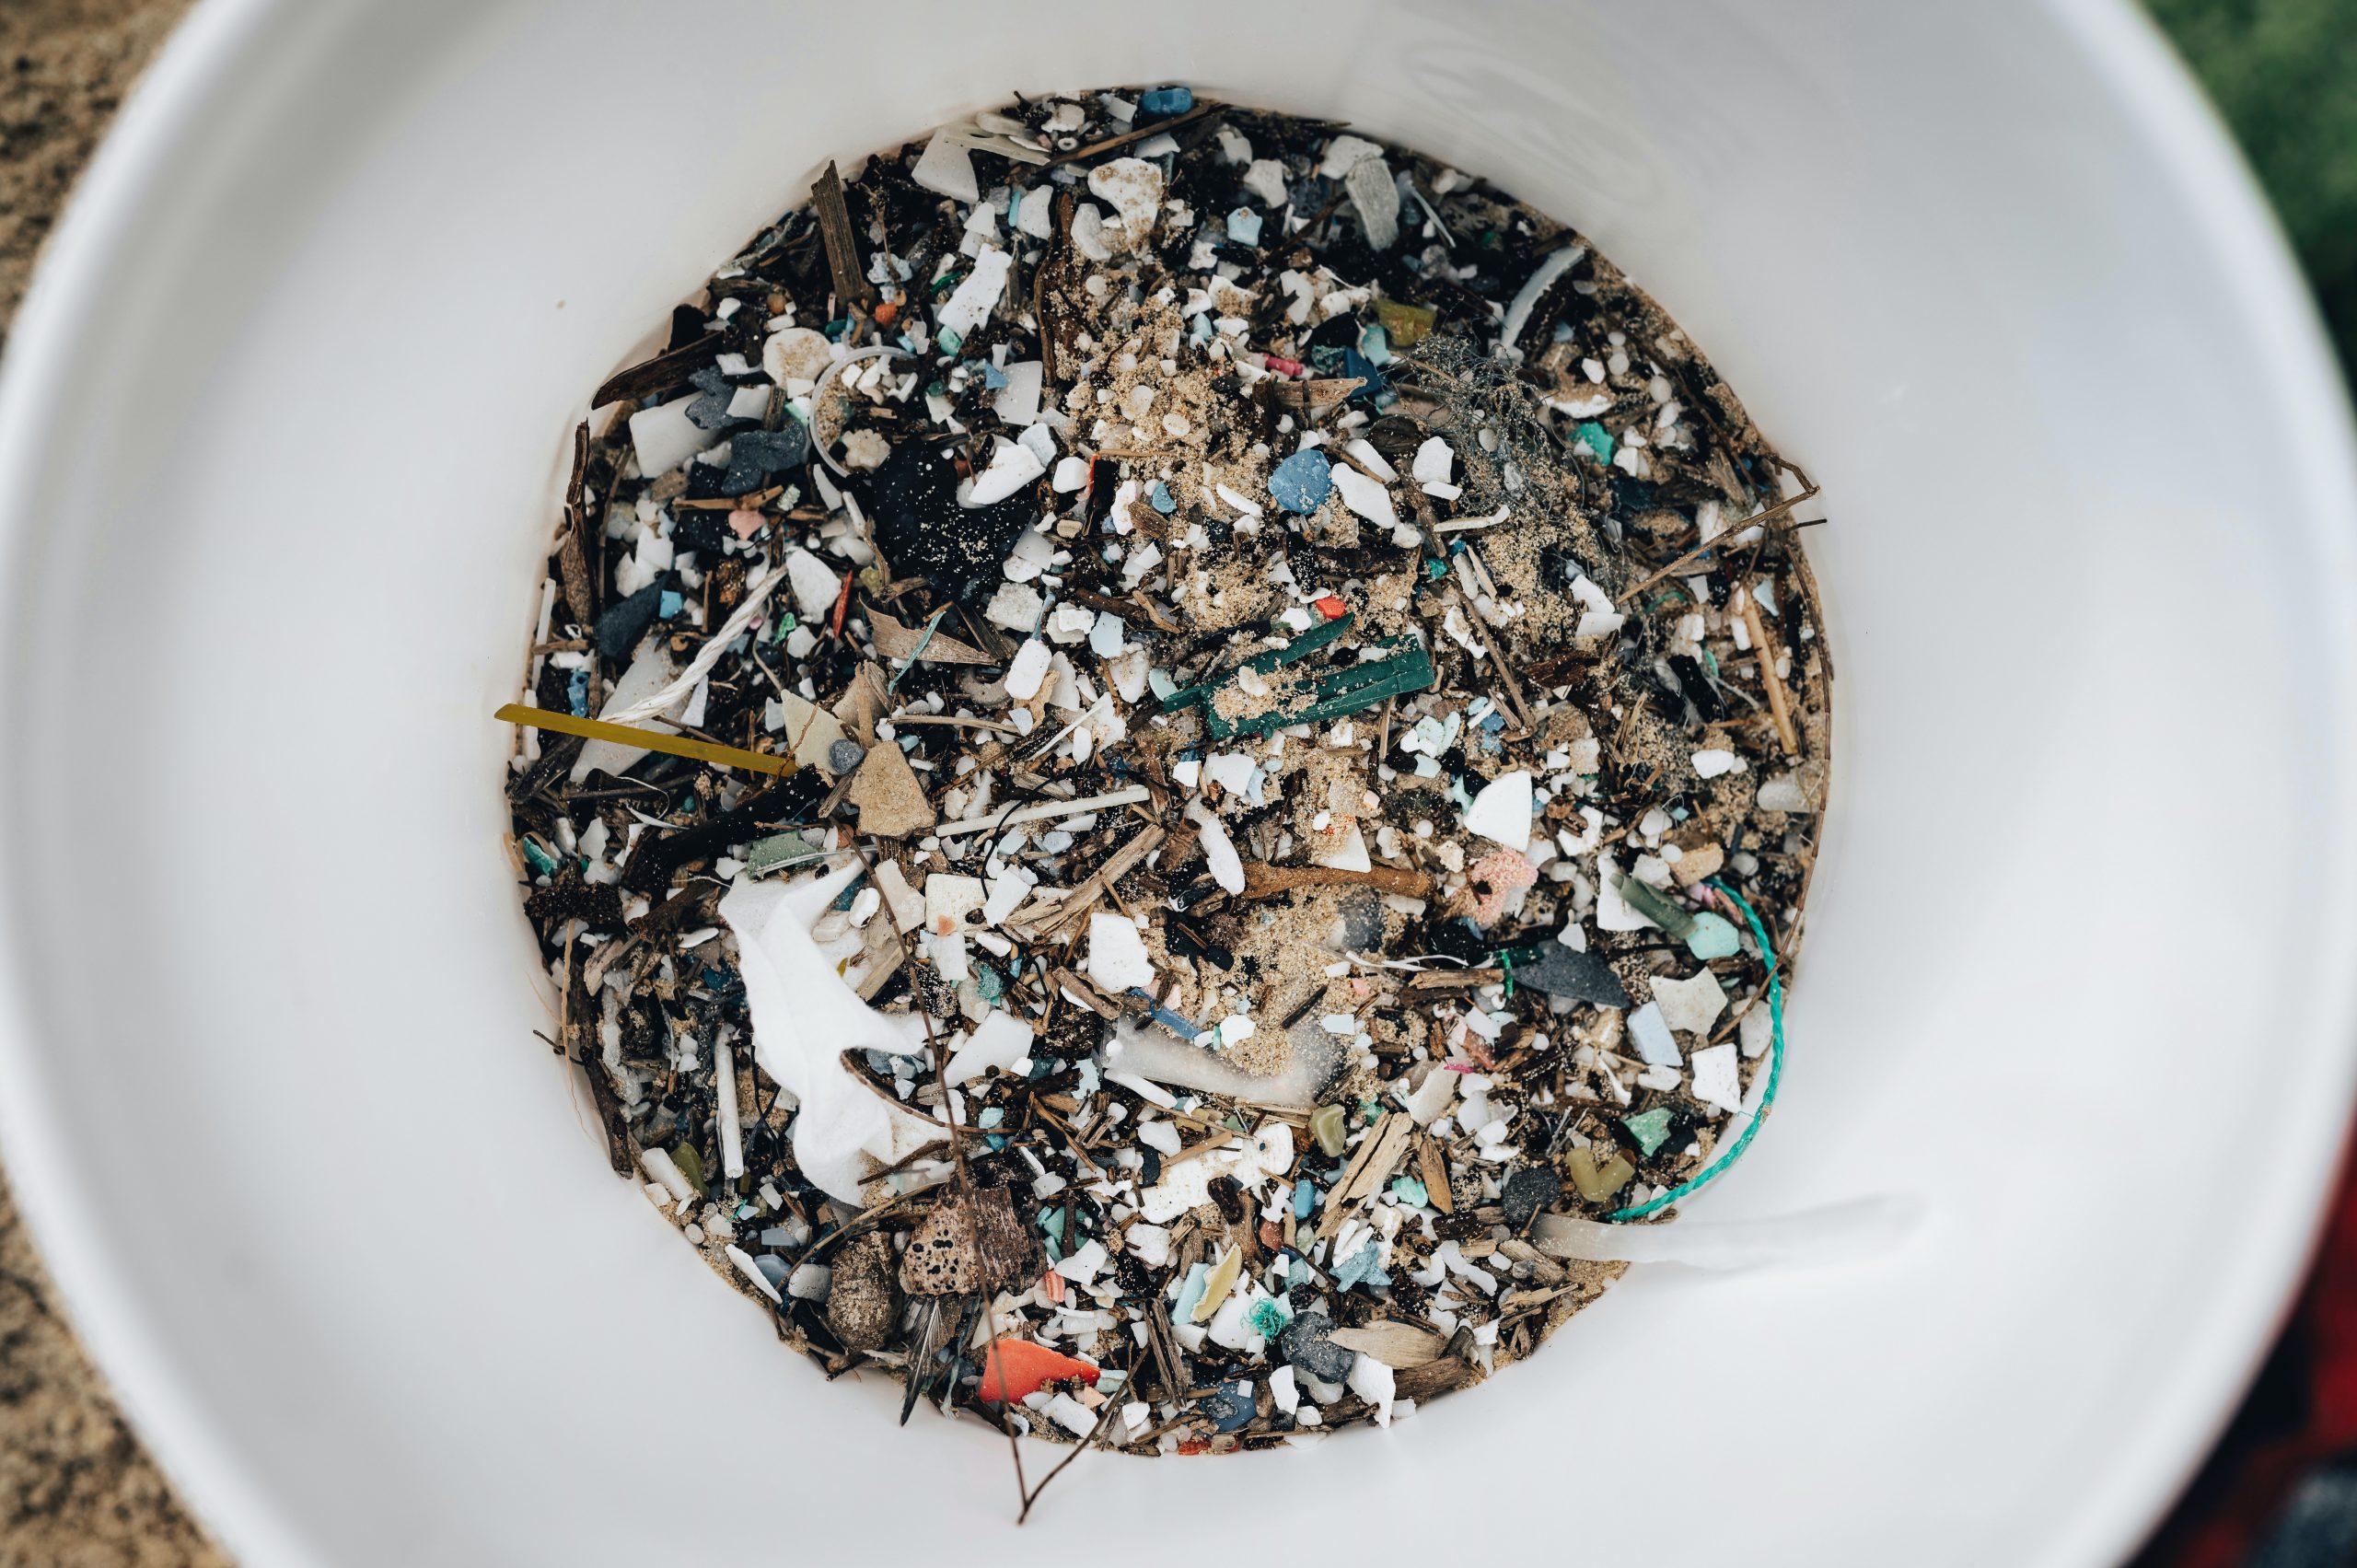 Microplastics: Facts & Solutions to a Global Problem